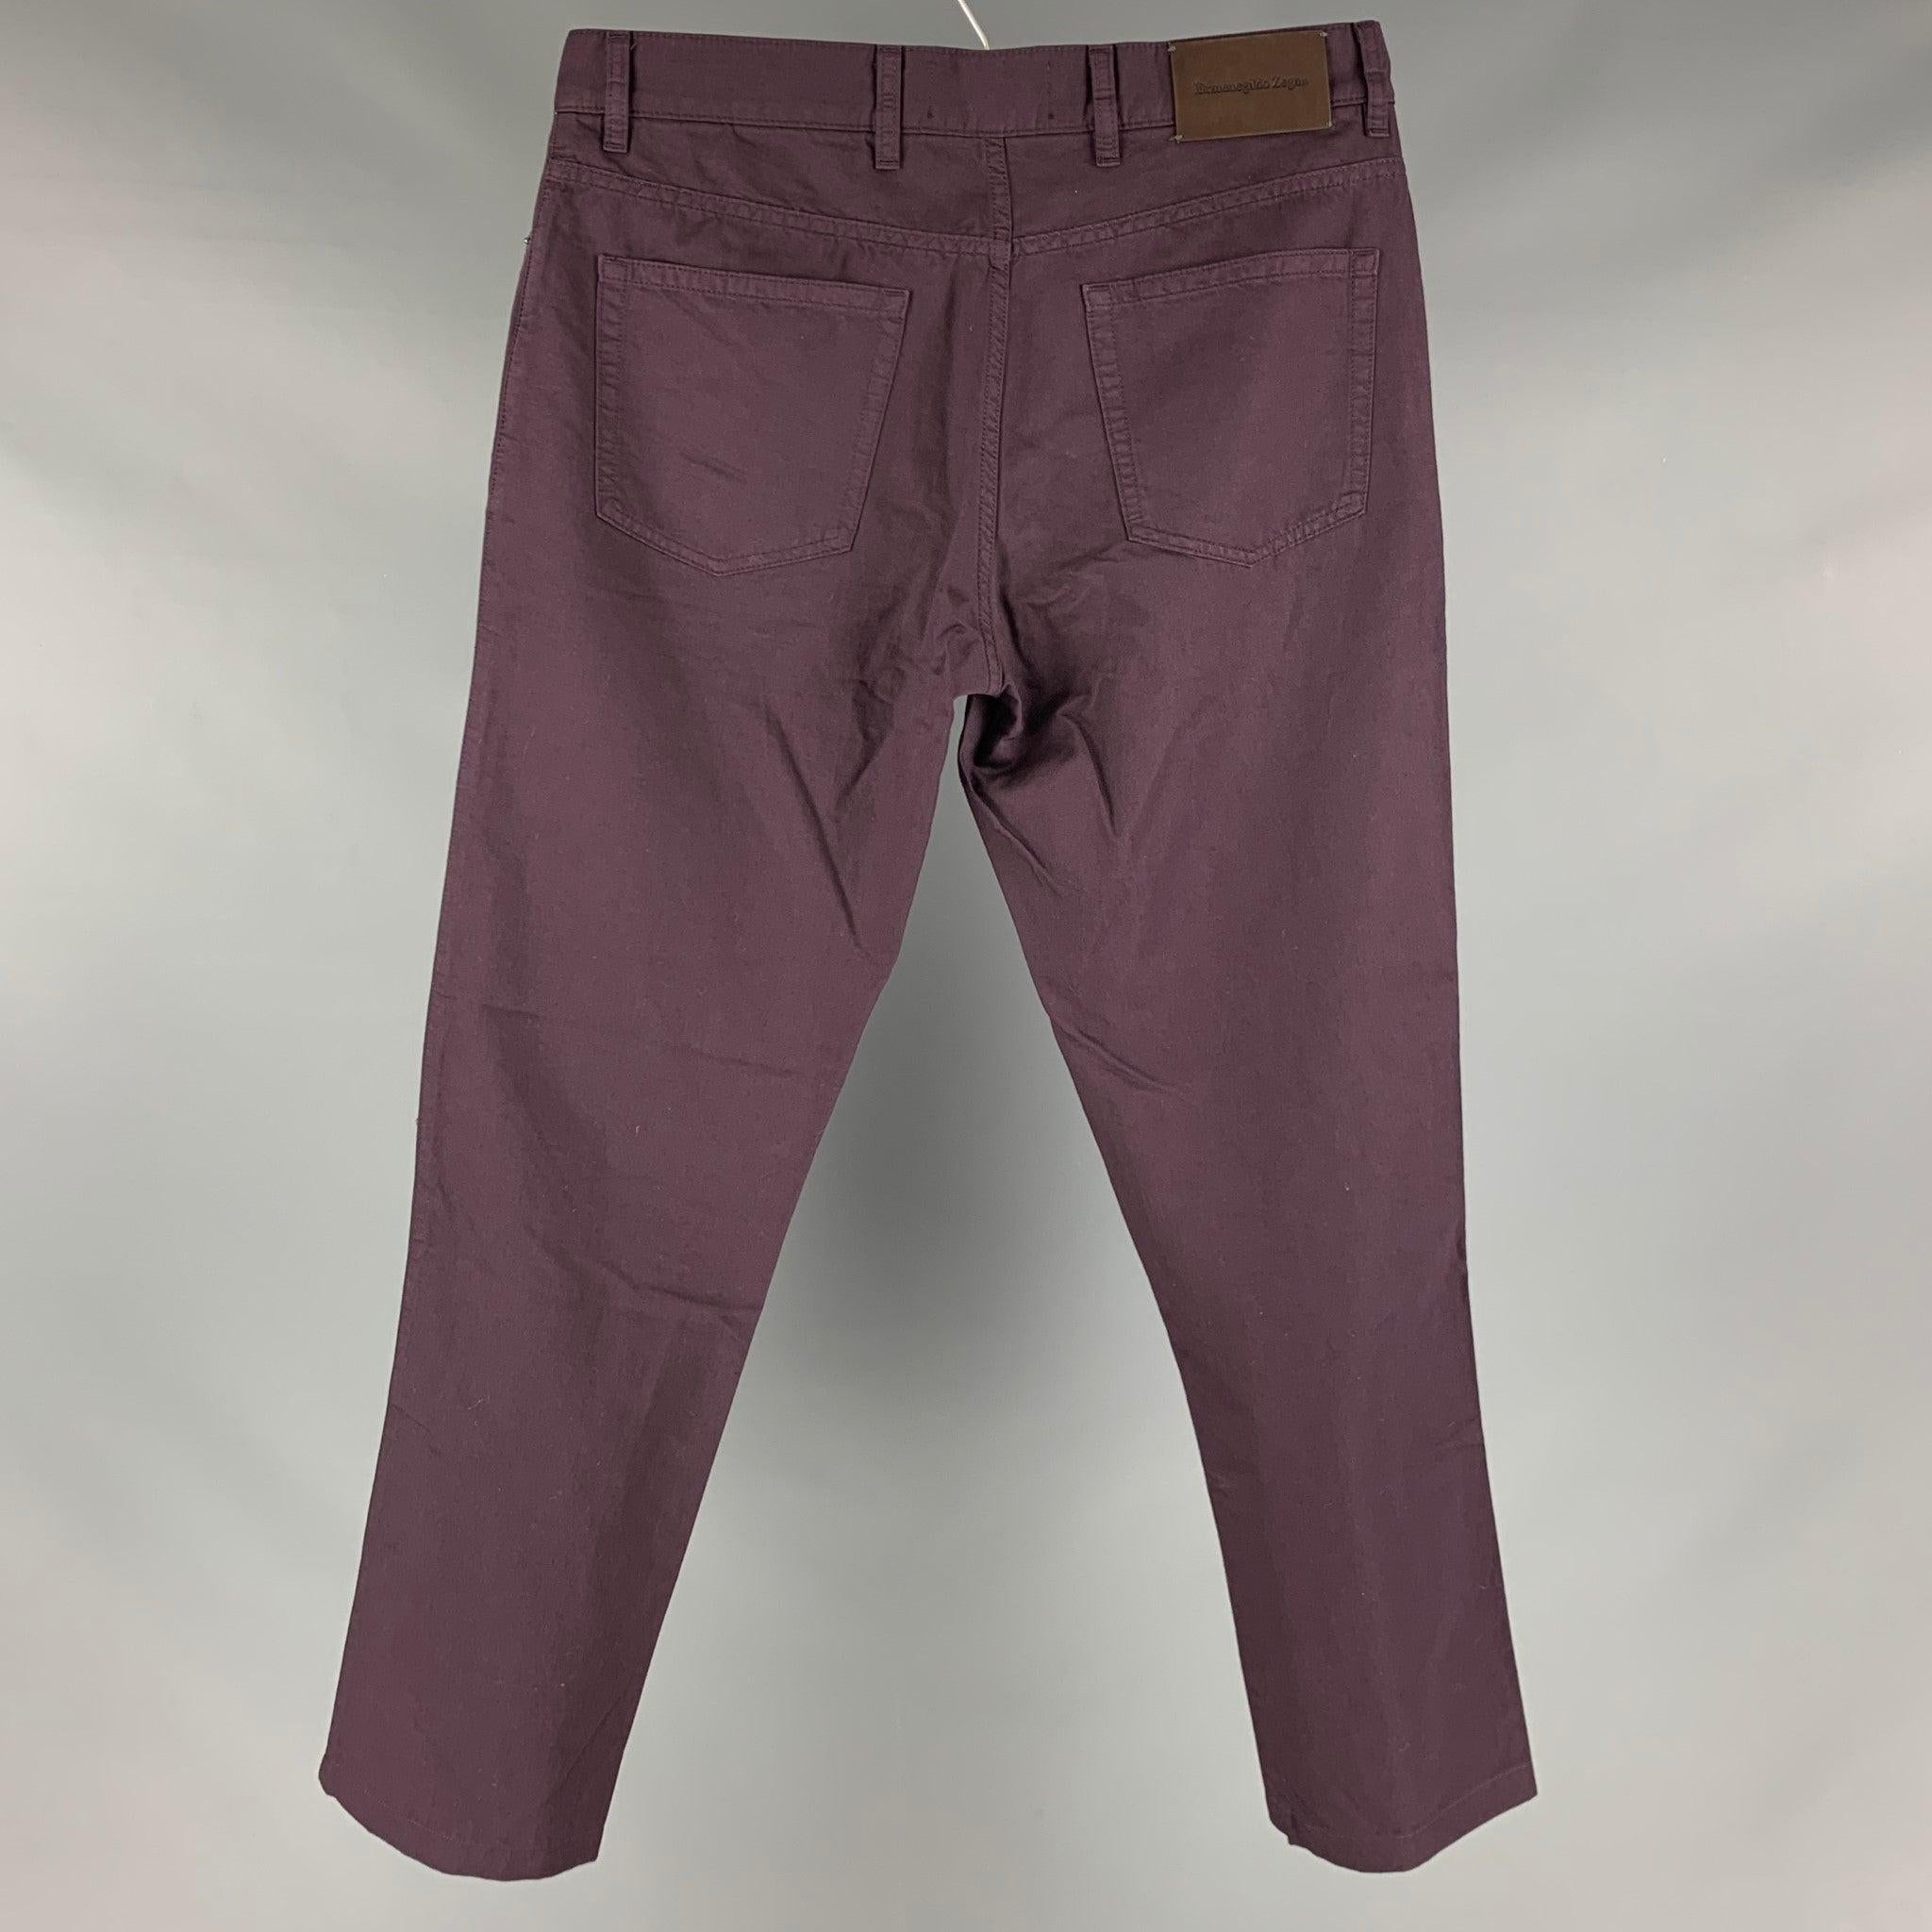 JOHN VARVATOS casual pants comes in a eggplant cotton and linen twill featuring a five pocket style, and a zip fly closure.Very Good Pre Owned Condition. 

Marked:   34  

Measurements: 
  Waist: 34 inches  Rise: 9 inches  Inseam: 28 inches  
  
  
